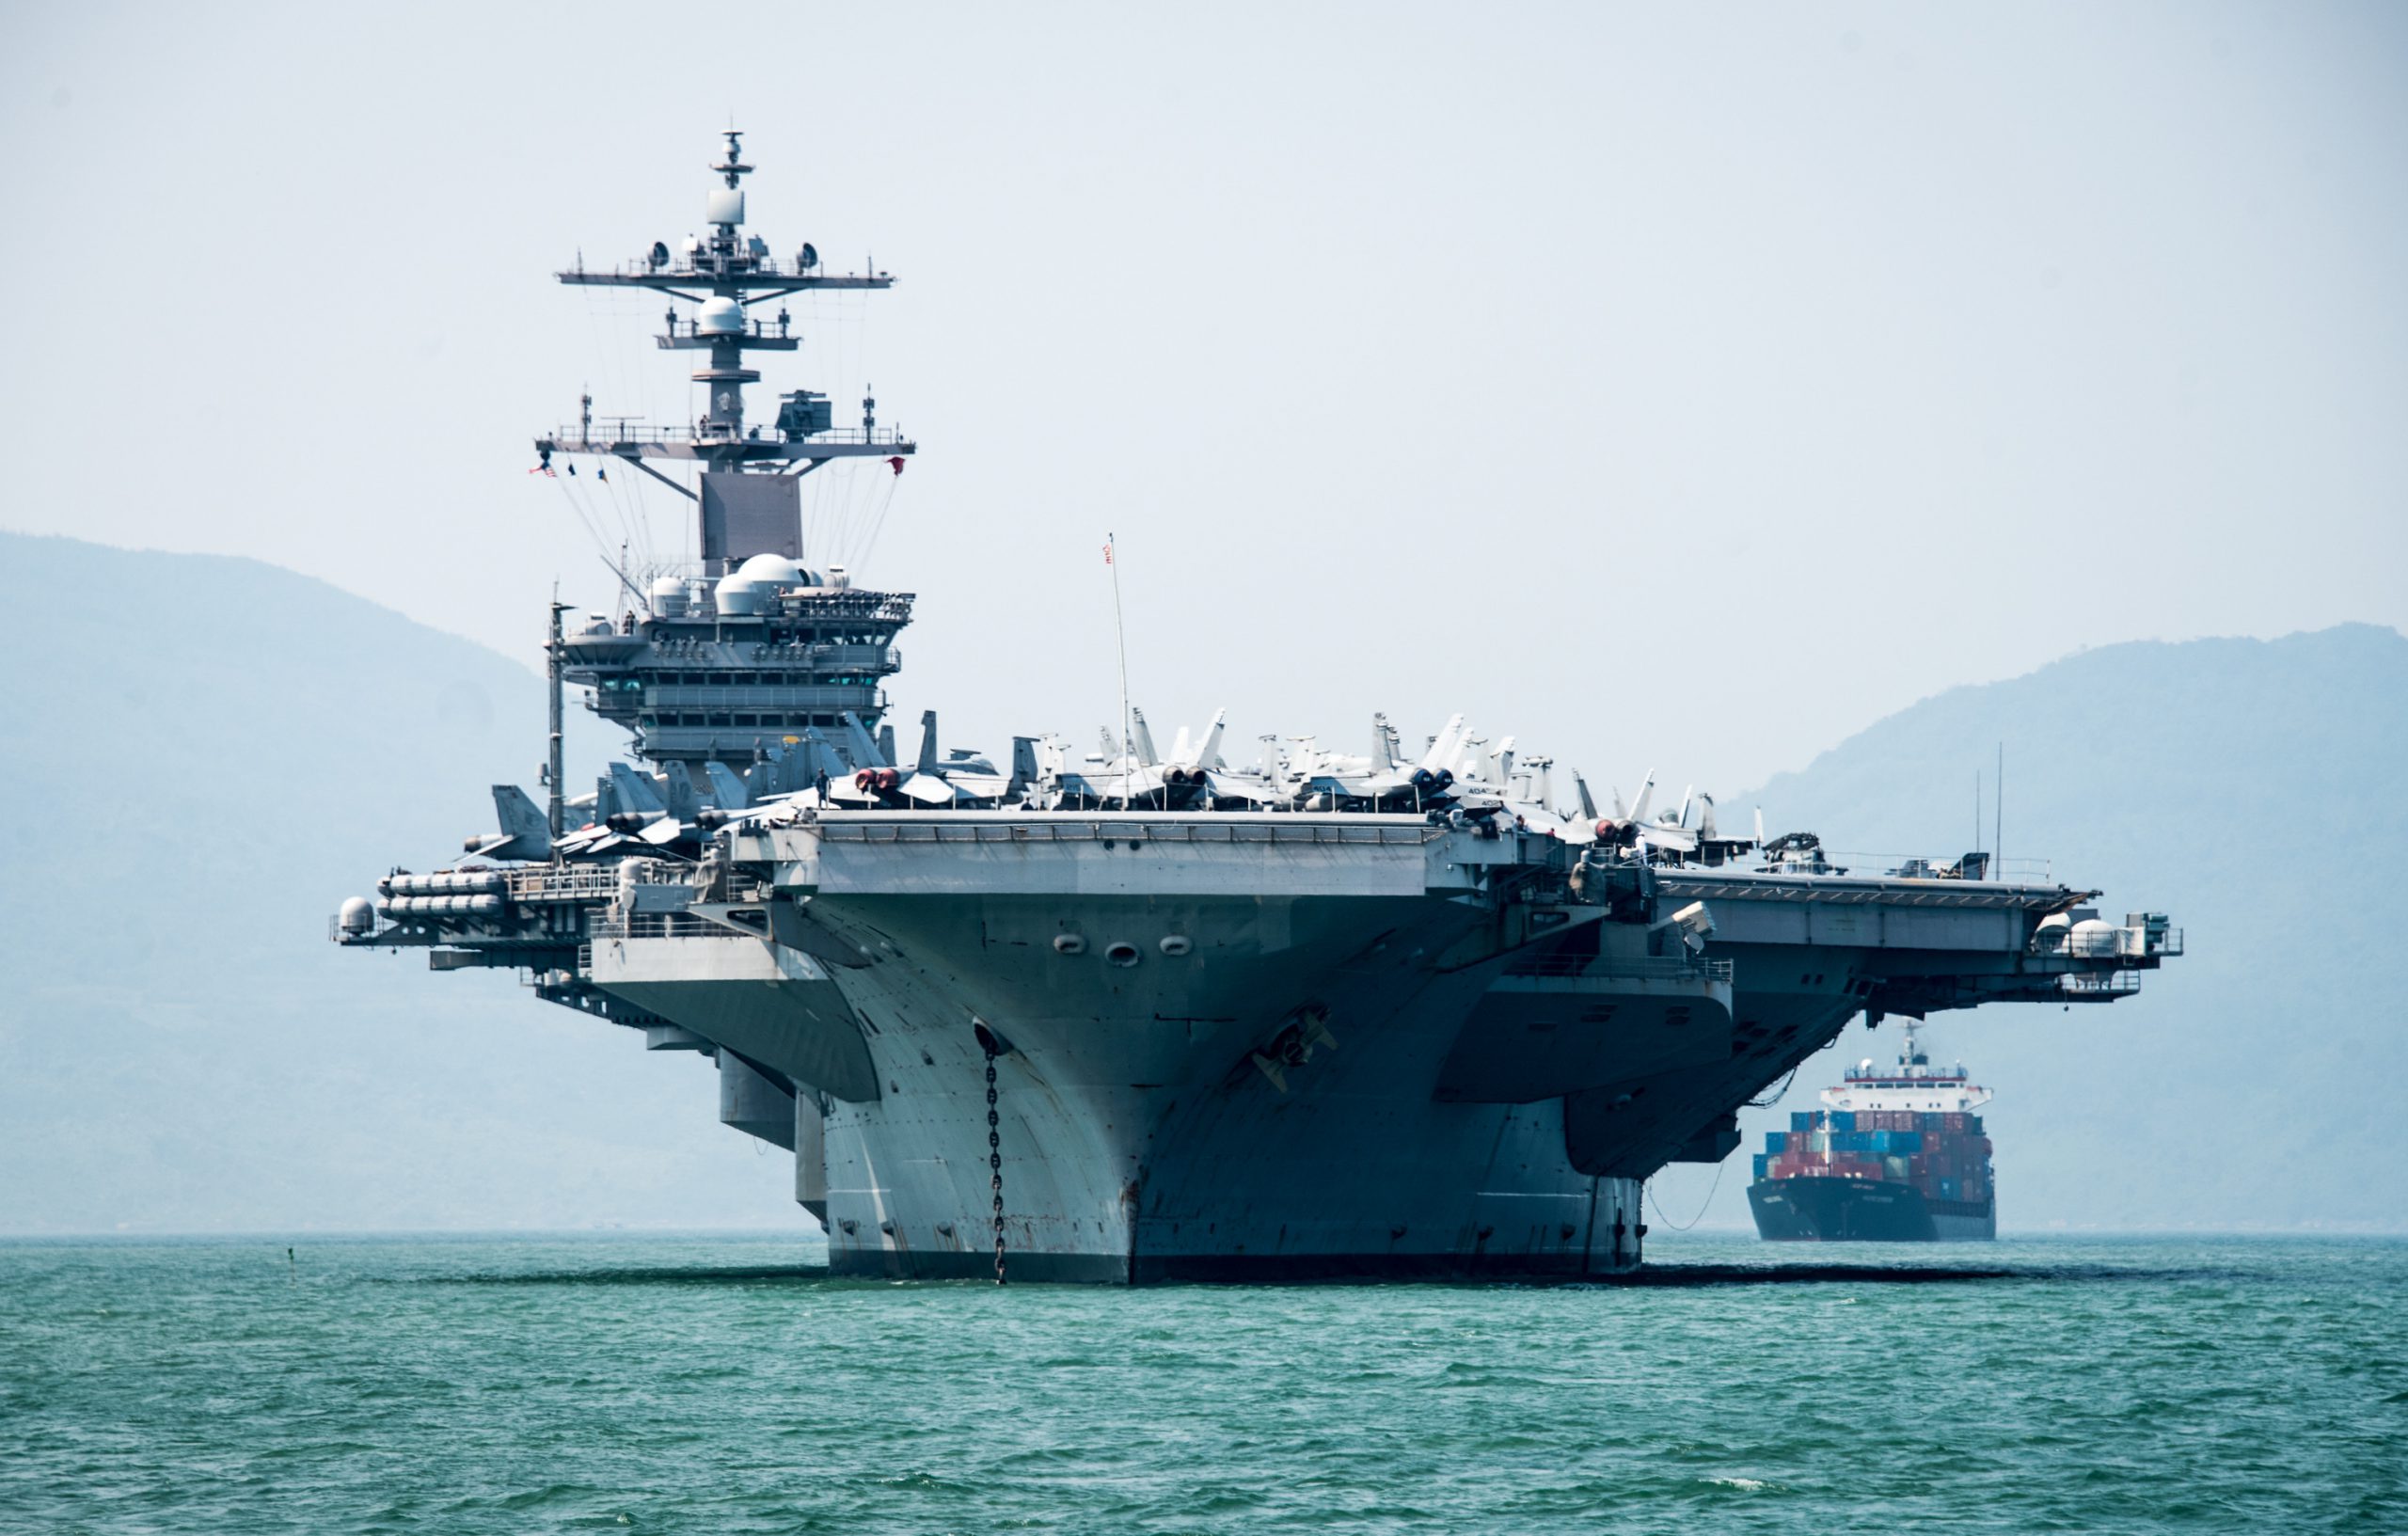 The aircraft carrier USS Carl Vinson arrives in Danang, Vietnam, for a scheduled port visit -